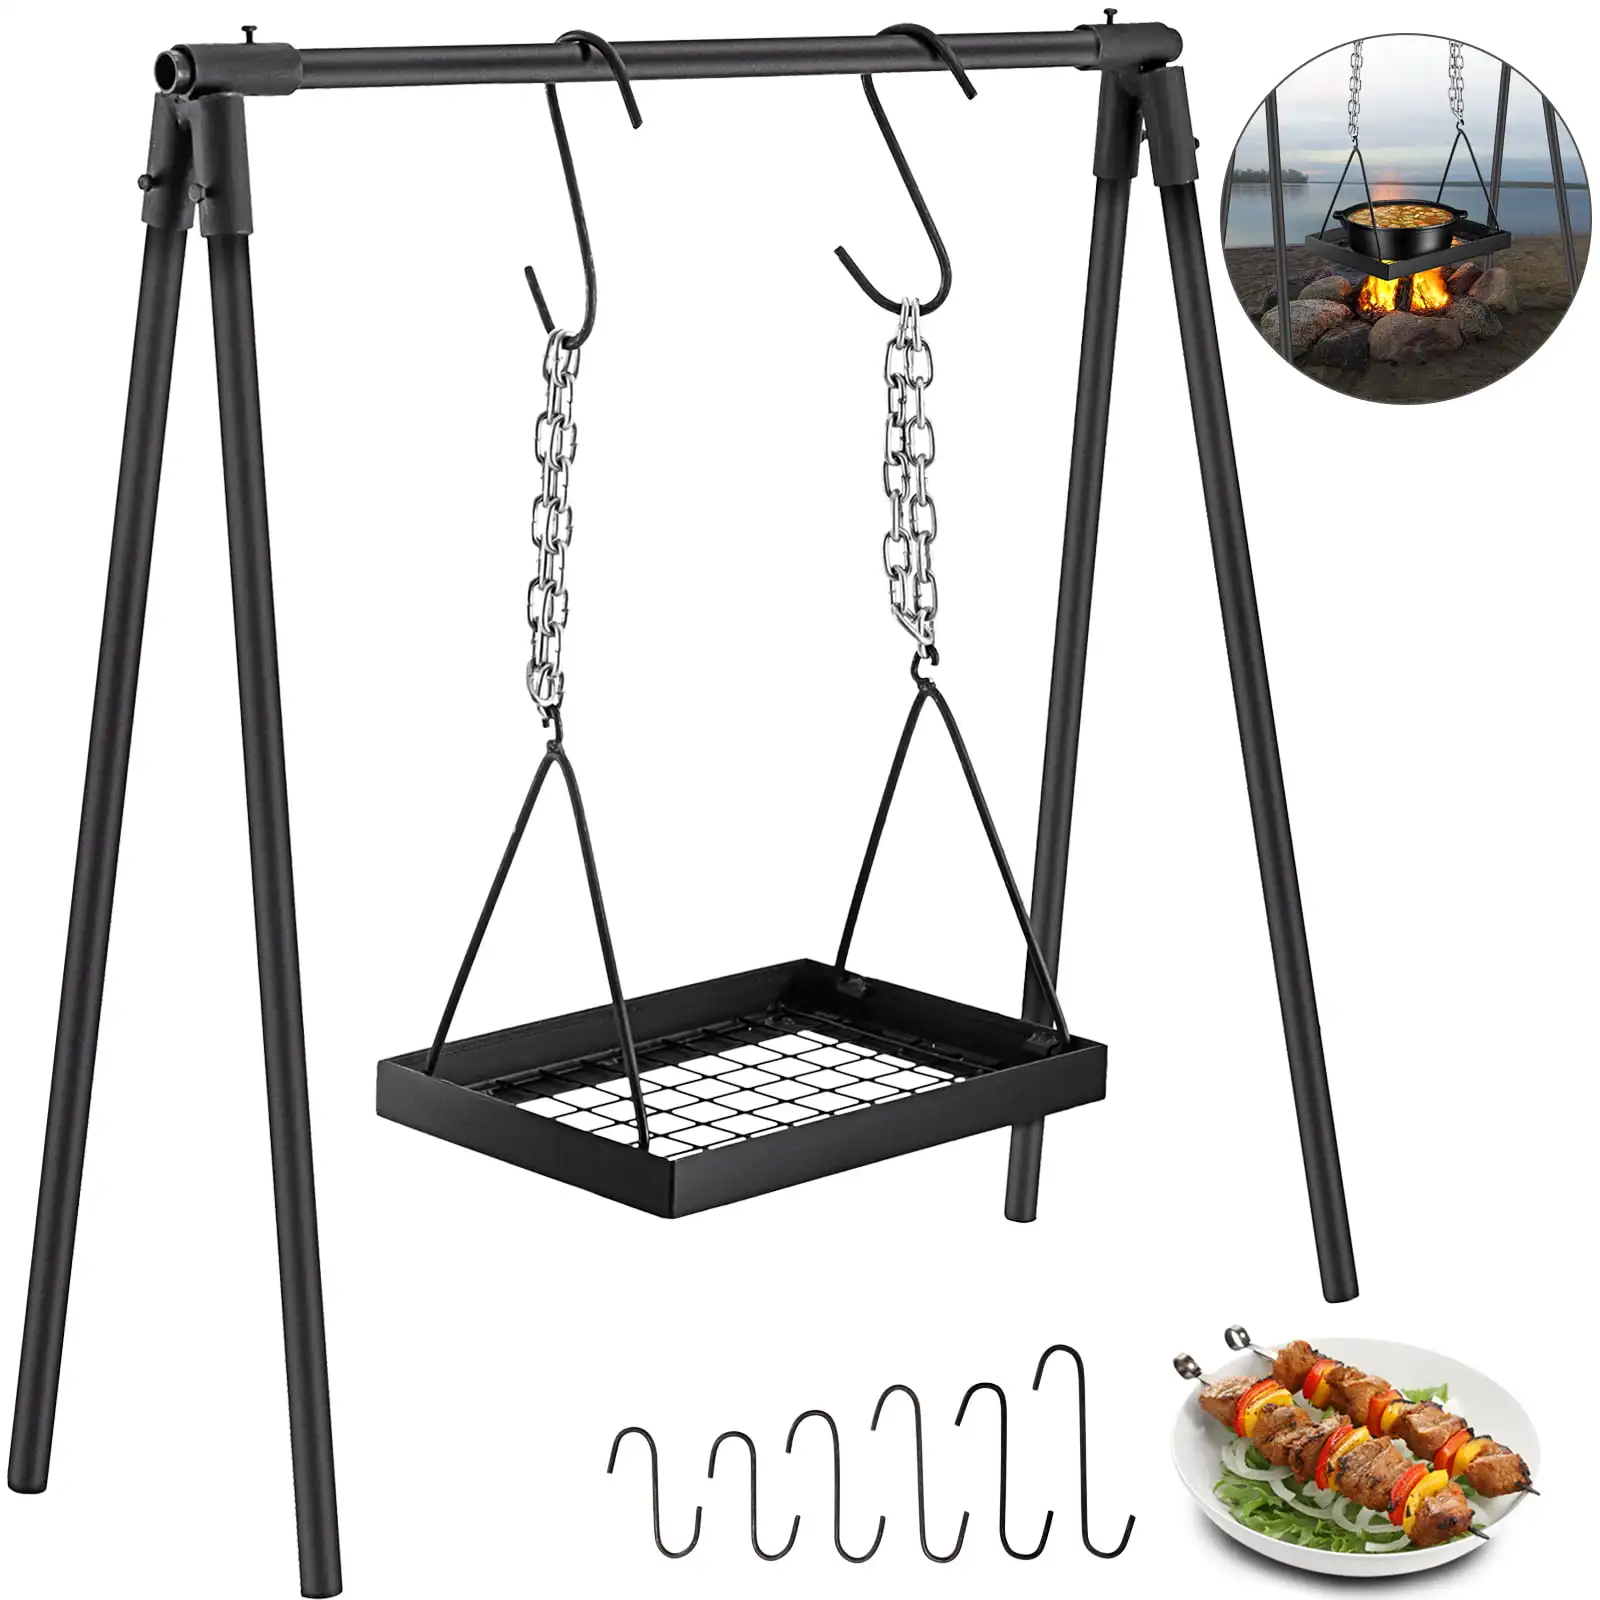 Swing Grill 37'' Campfire Cooking Stand Outdoor Picnic Cookware Bonfire Party Equipment